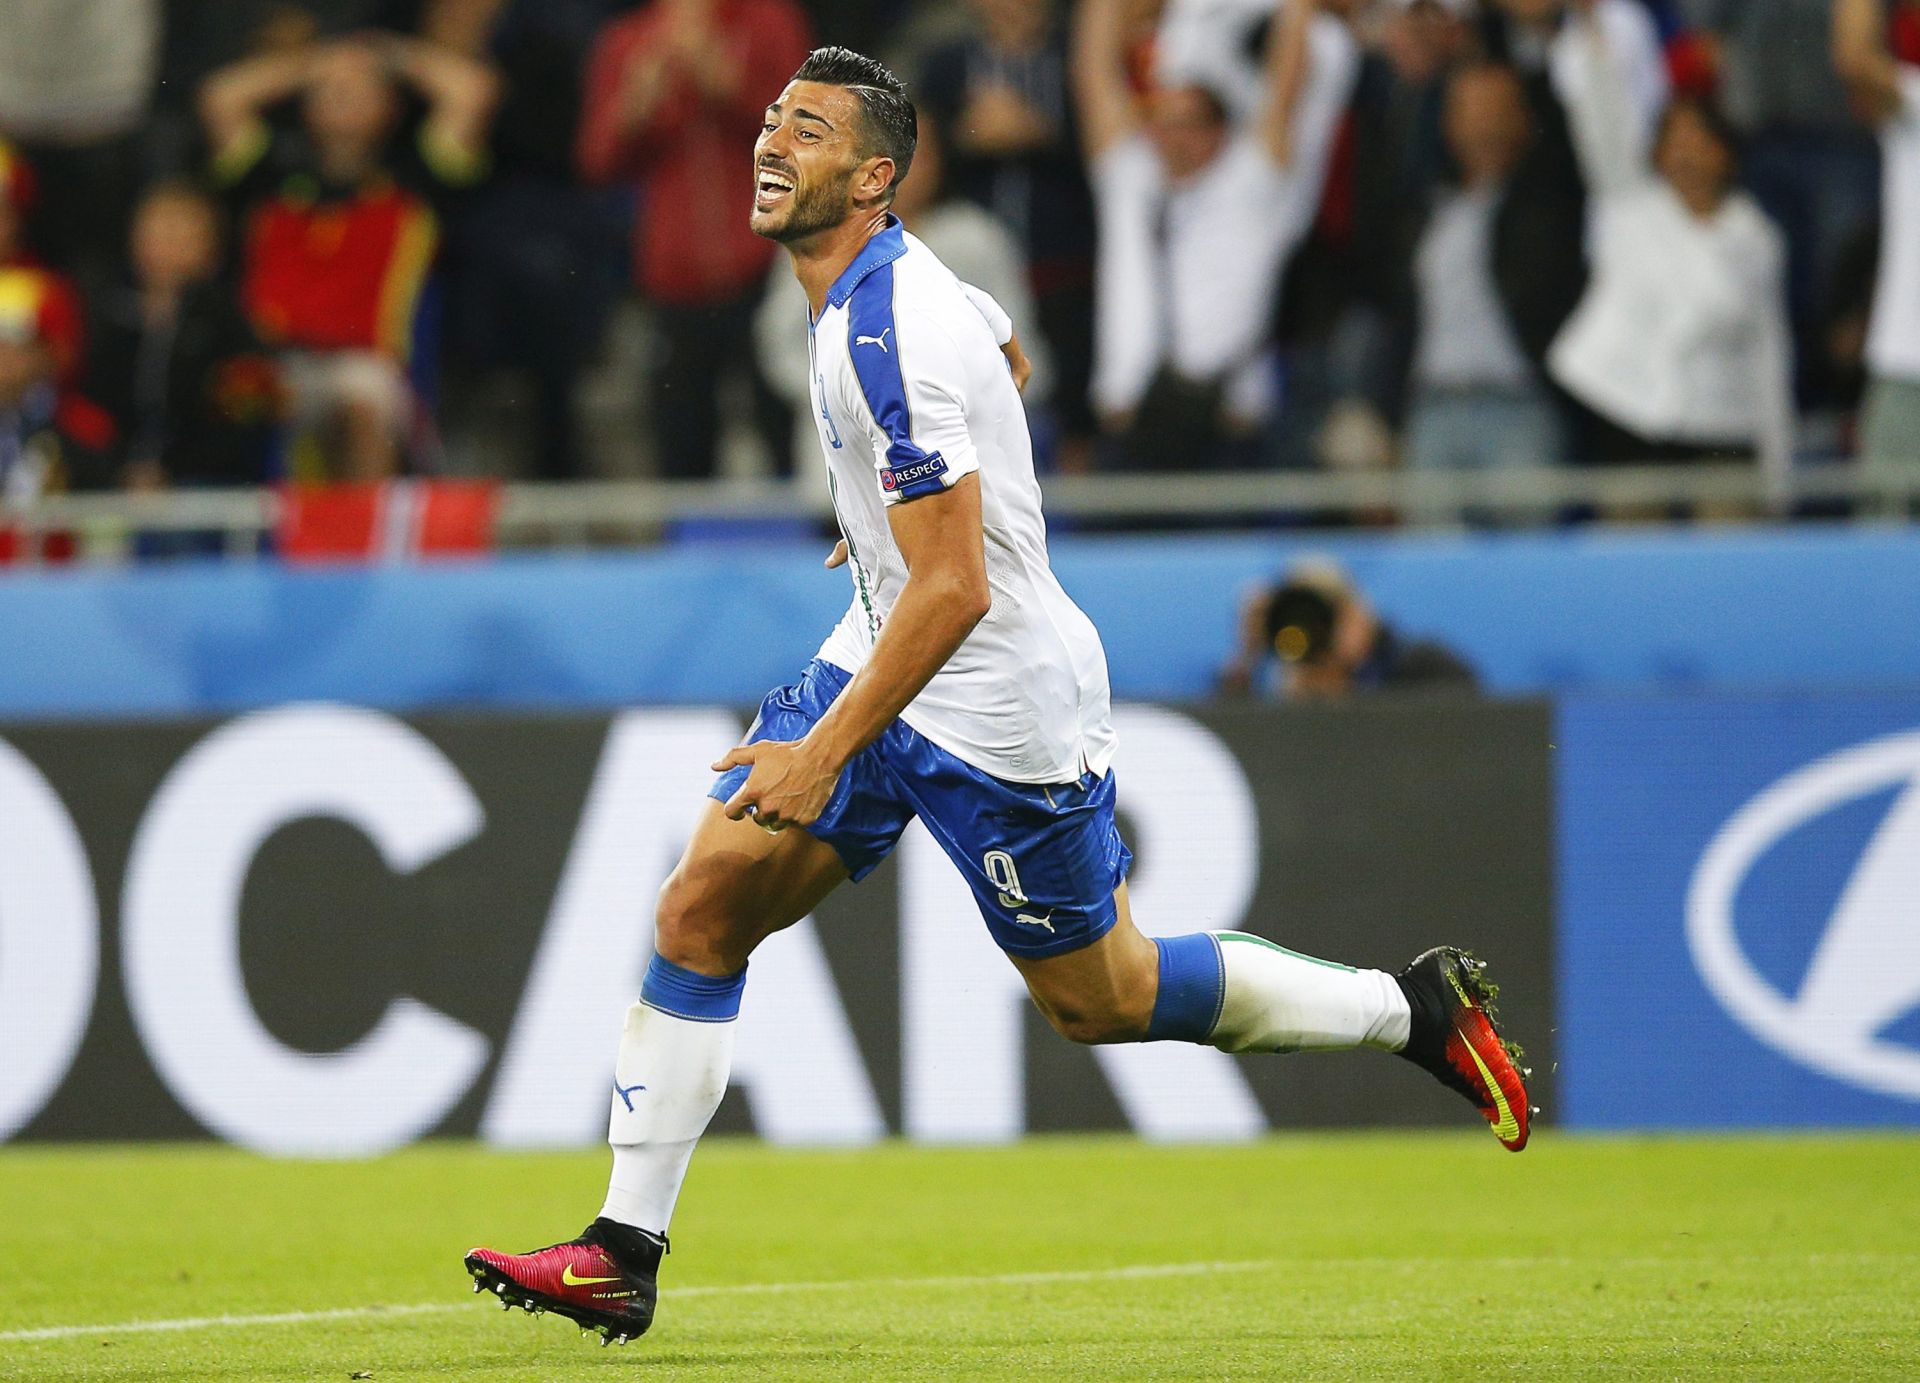 epa05363000 Graziano Pelle of Italy celebrates after scoring the 2-0 lead during the UEFA EURO 2016 group E preliminary round match between Belgium and Italy at Stade de Lyon in Lyon, France, 13 June 2016. Italy won 2-0.

(RESTRICTIONS APPLY: For editorial news reporting purposes only. Not used for commercial or marketing purposes without prior written approval of UEFA. Images must appear as still images and must not emulate match action video footage. Photographs published in online publications (whether via the Internet or otherwise) shall have an interval of at least 20 seconds between the posting.)  EPA/ROBERT GHEMENT   EDITORIAL USE ONLY